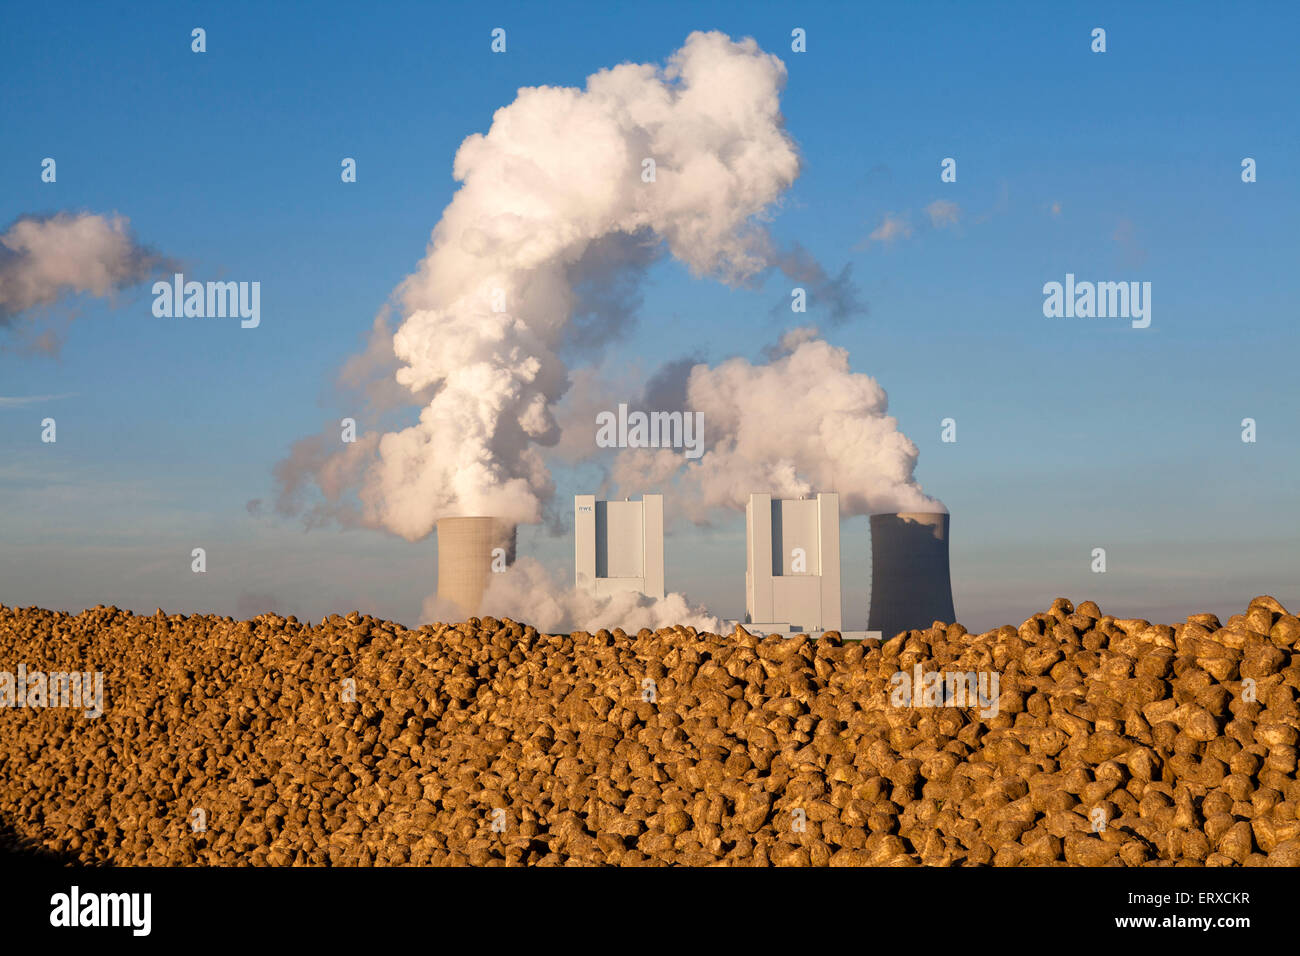 sugar beets in front of the lignite-fired power plant Neurath in Grevenbroich, Germany. Stock Photo